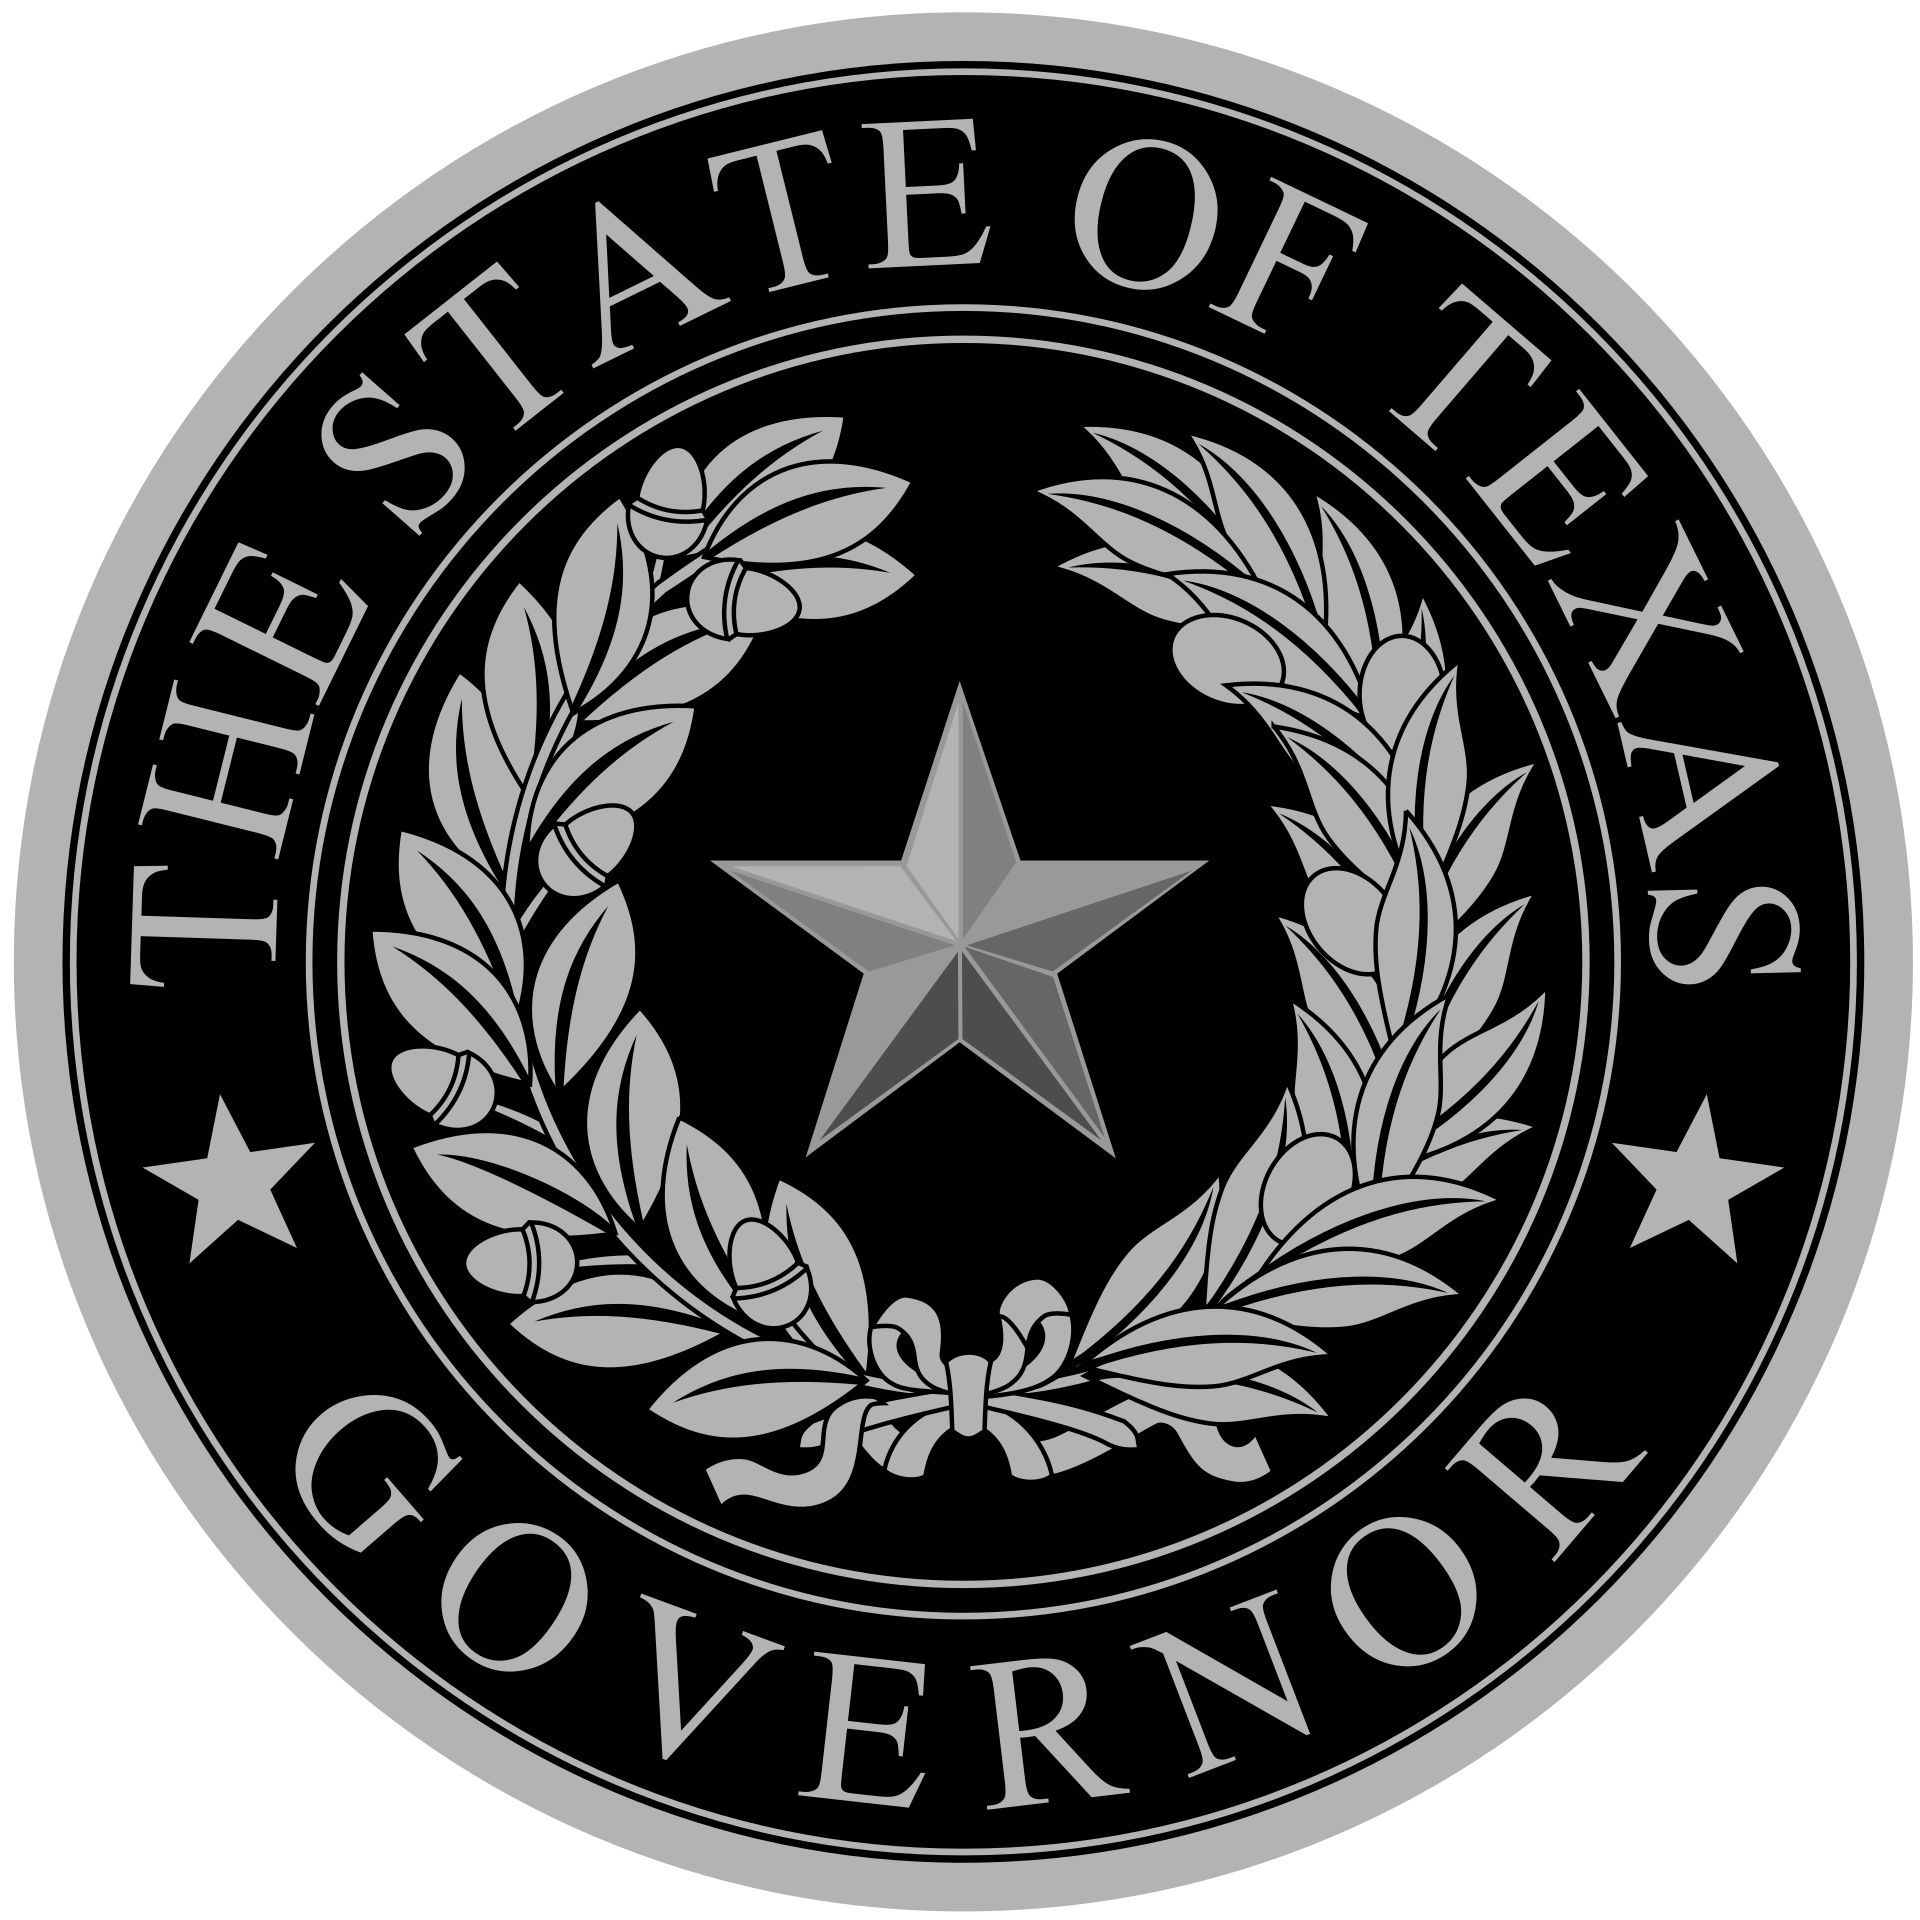 s is for seal list of governors of texas wikipedia s is for seal 